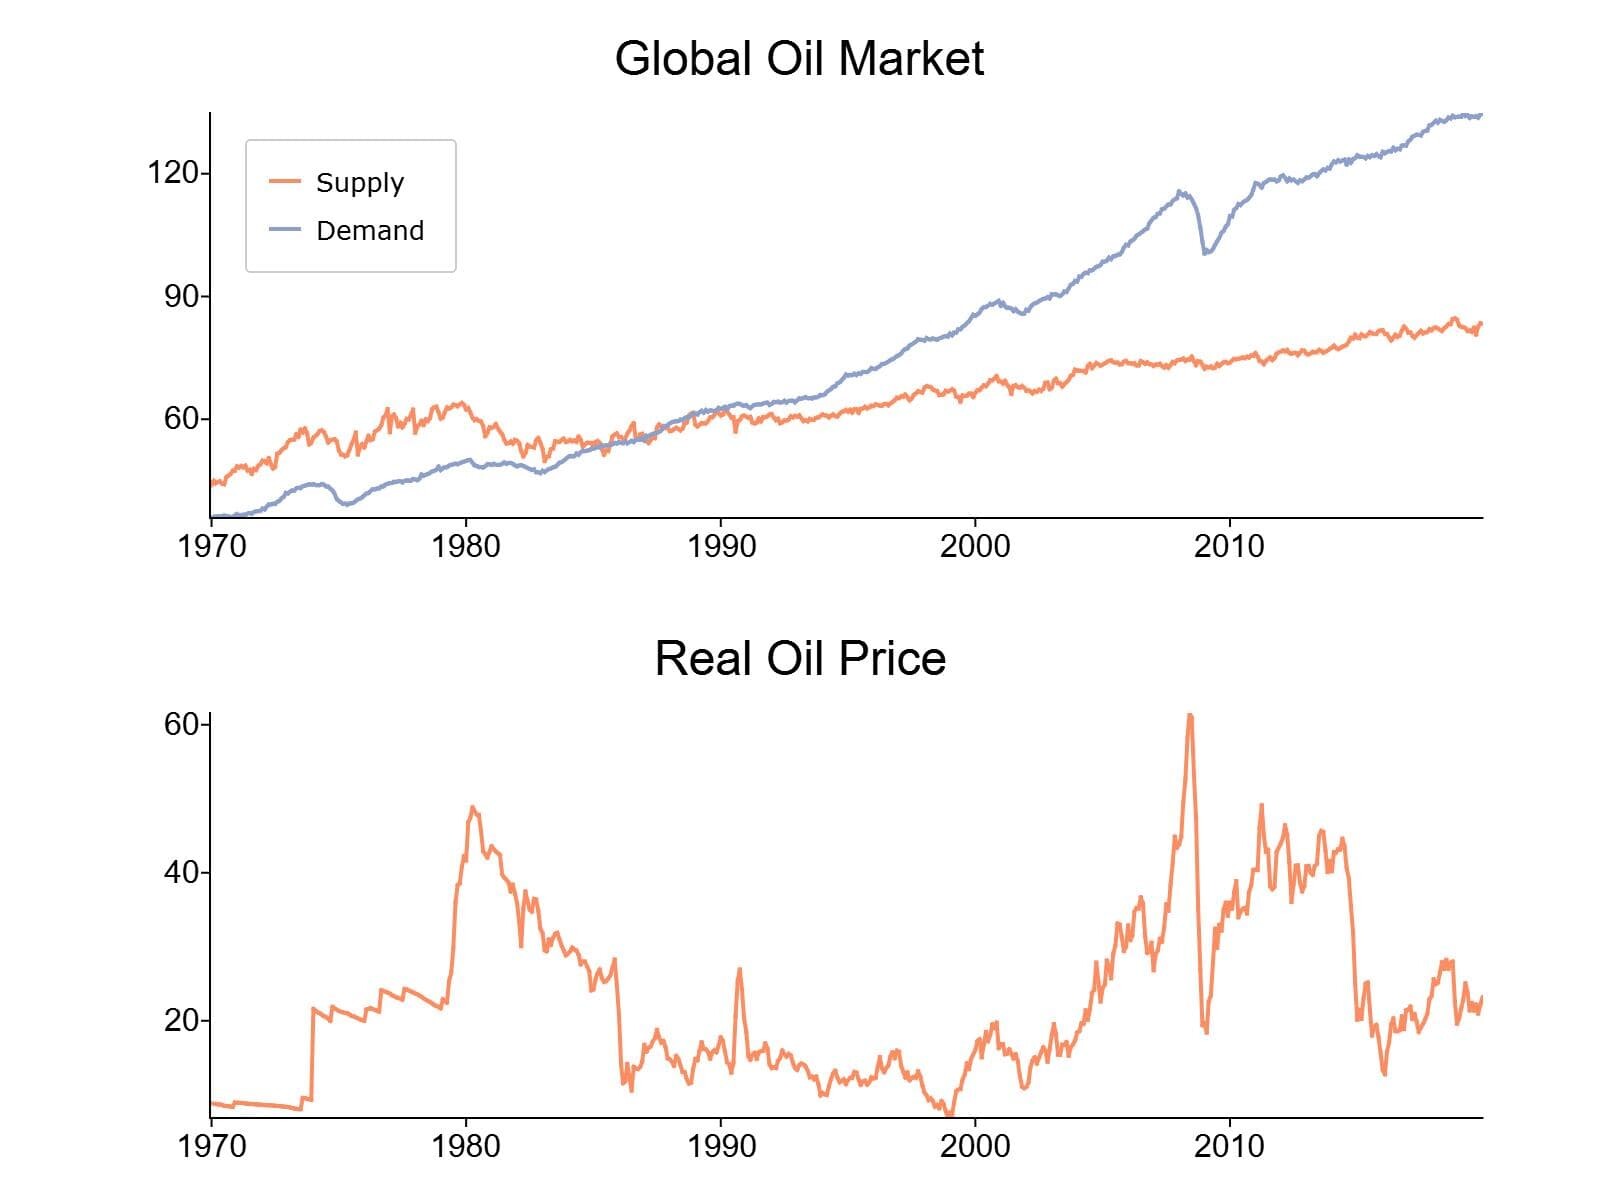 Oil market supply, demand, and real price. 